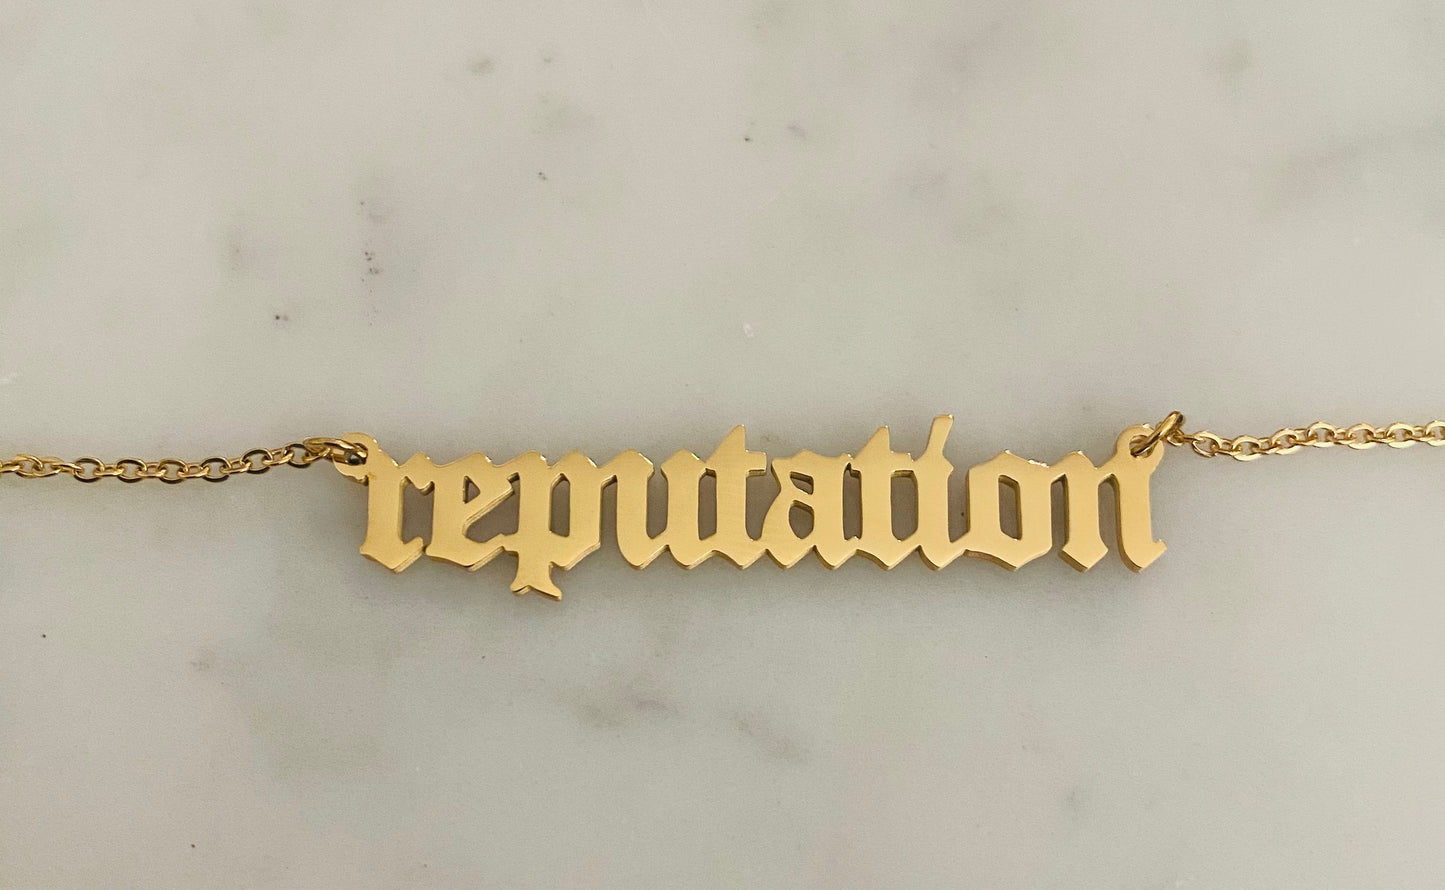 45 cm stainless steel reputation necklace